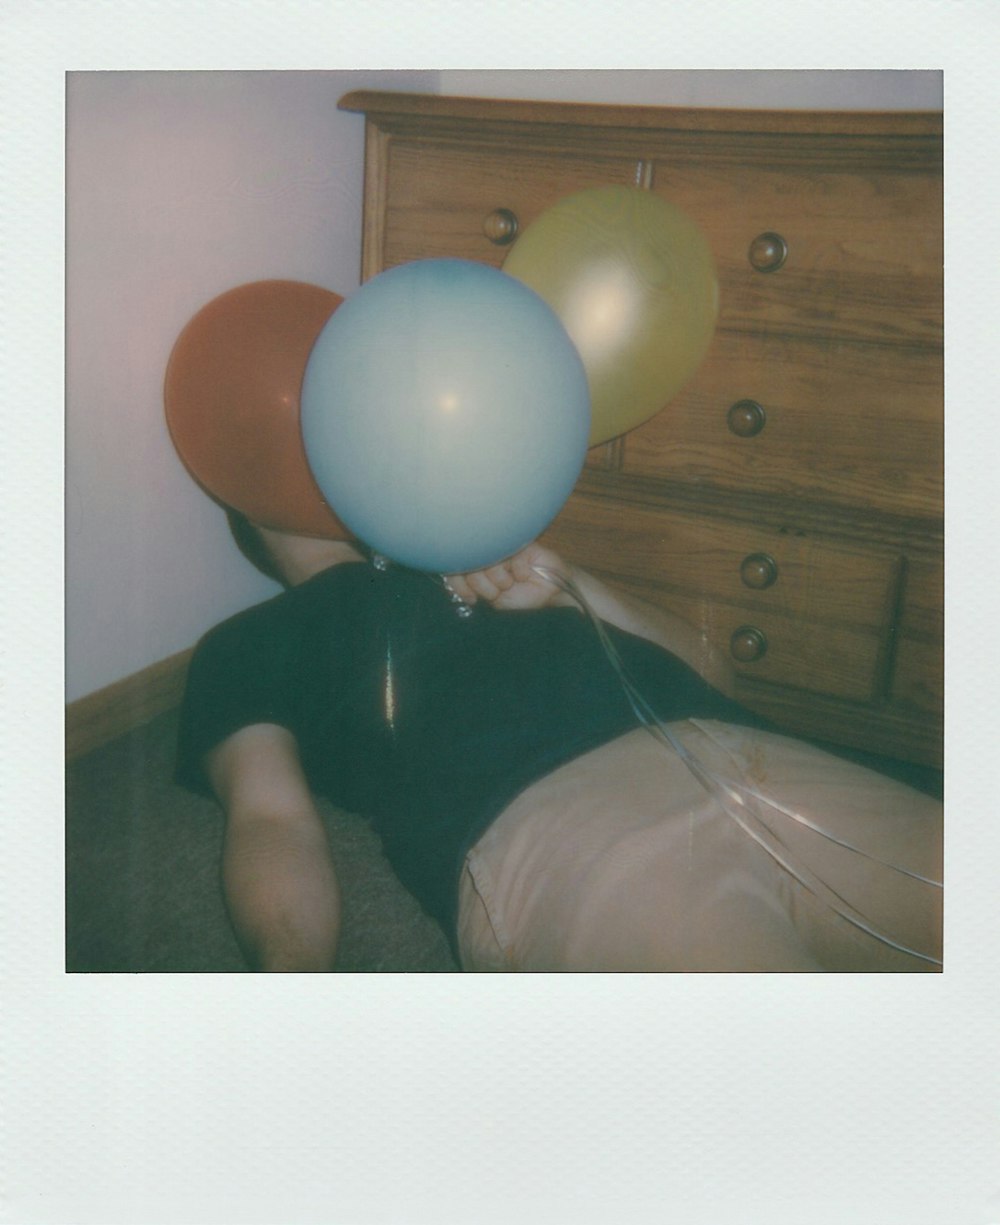 man holding three assorted-color balloons